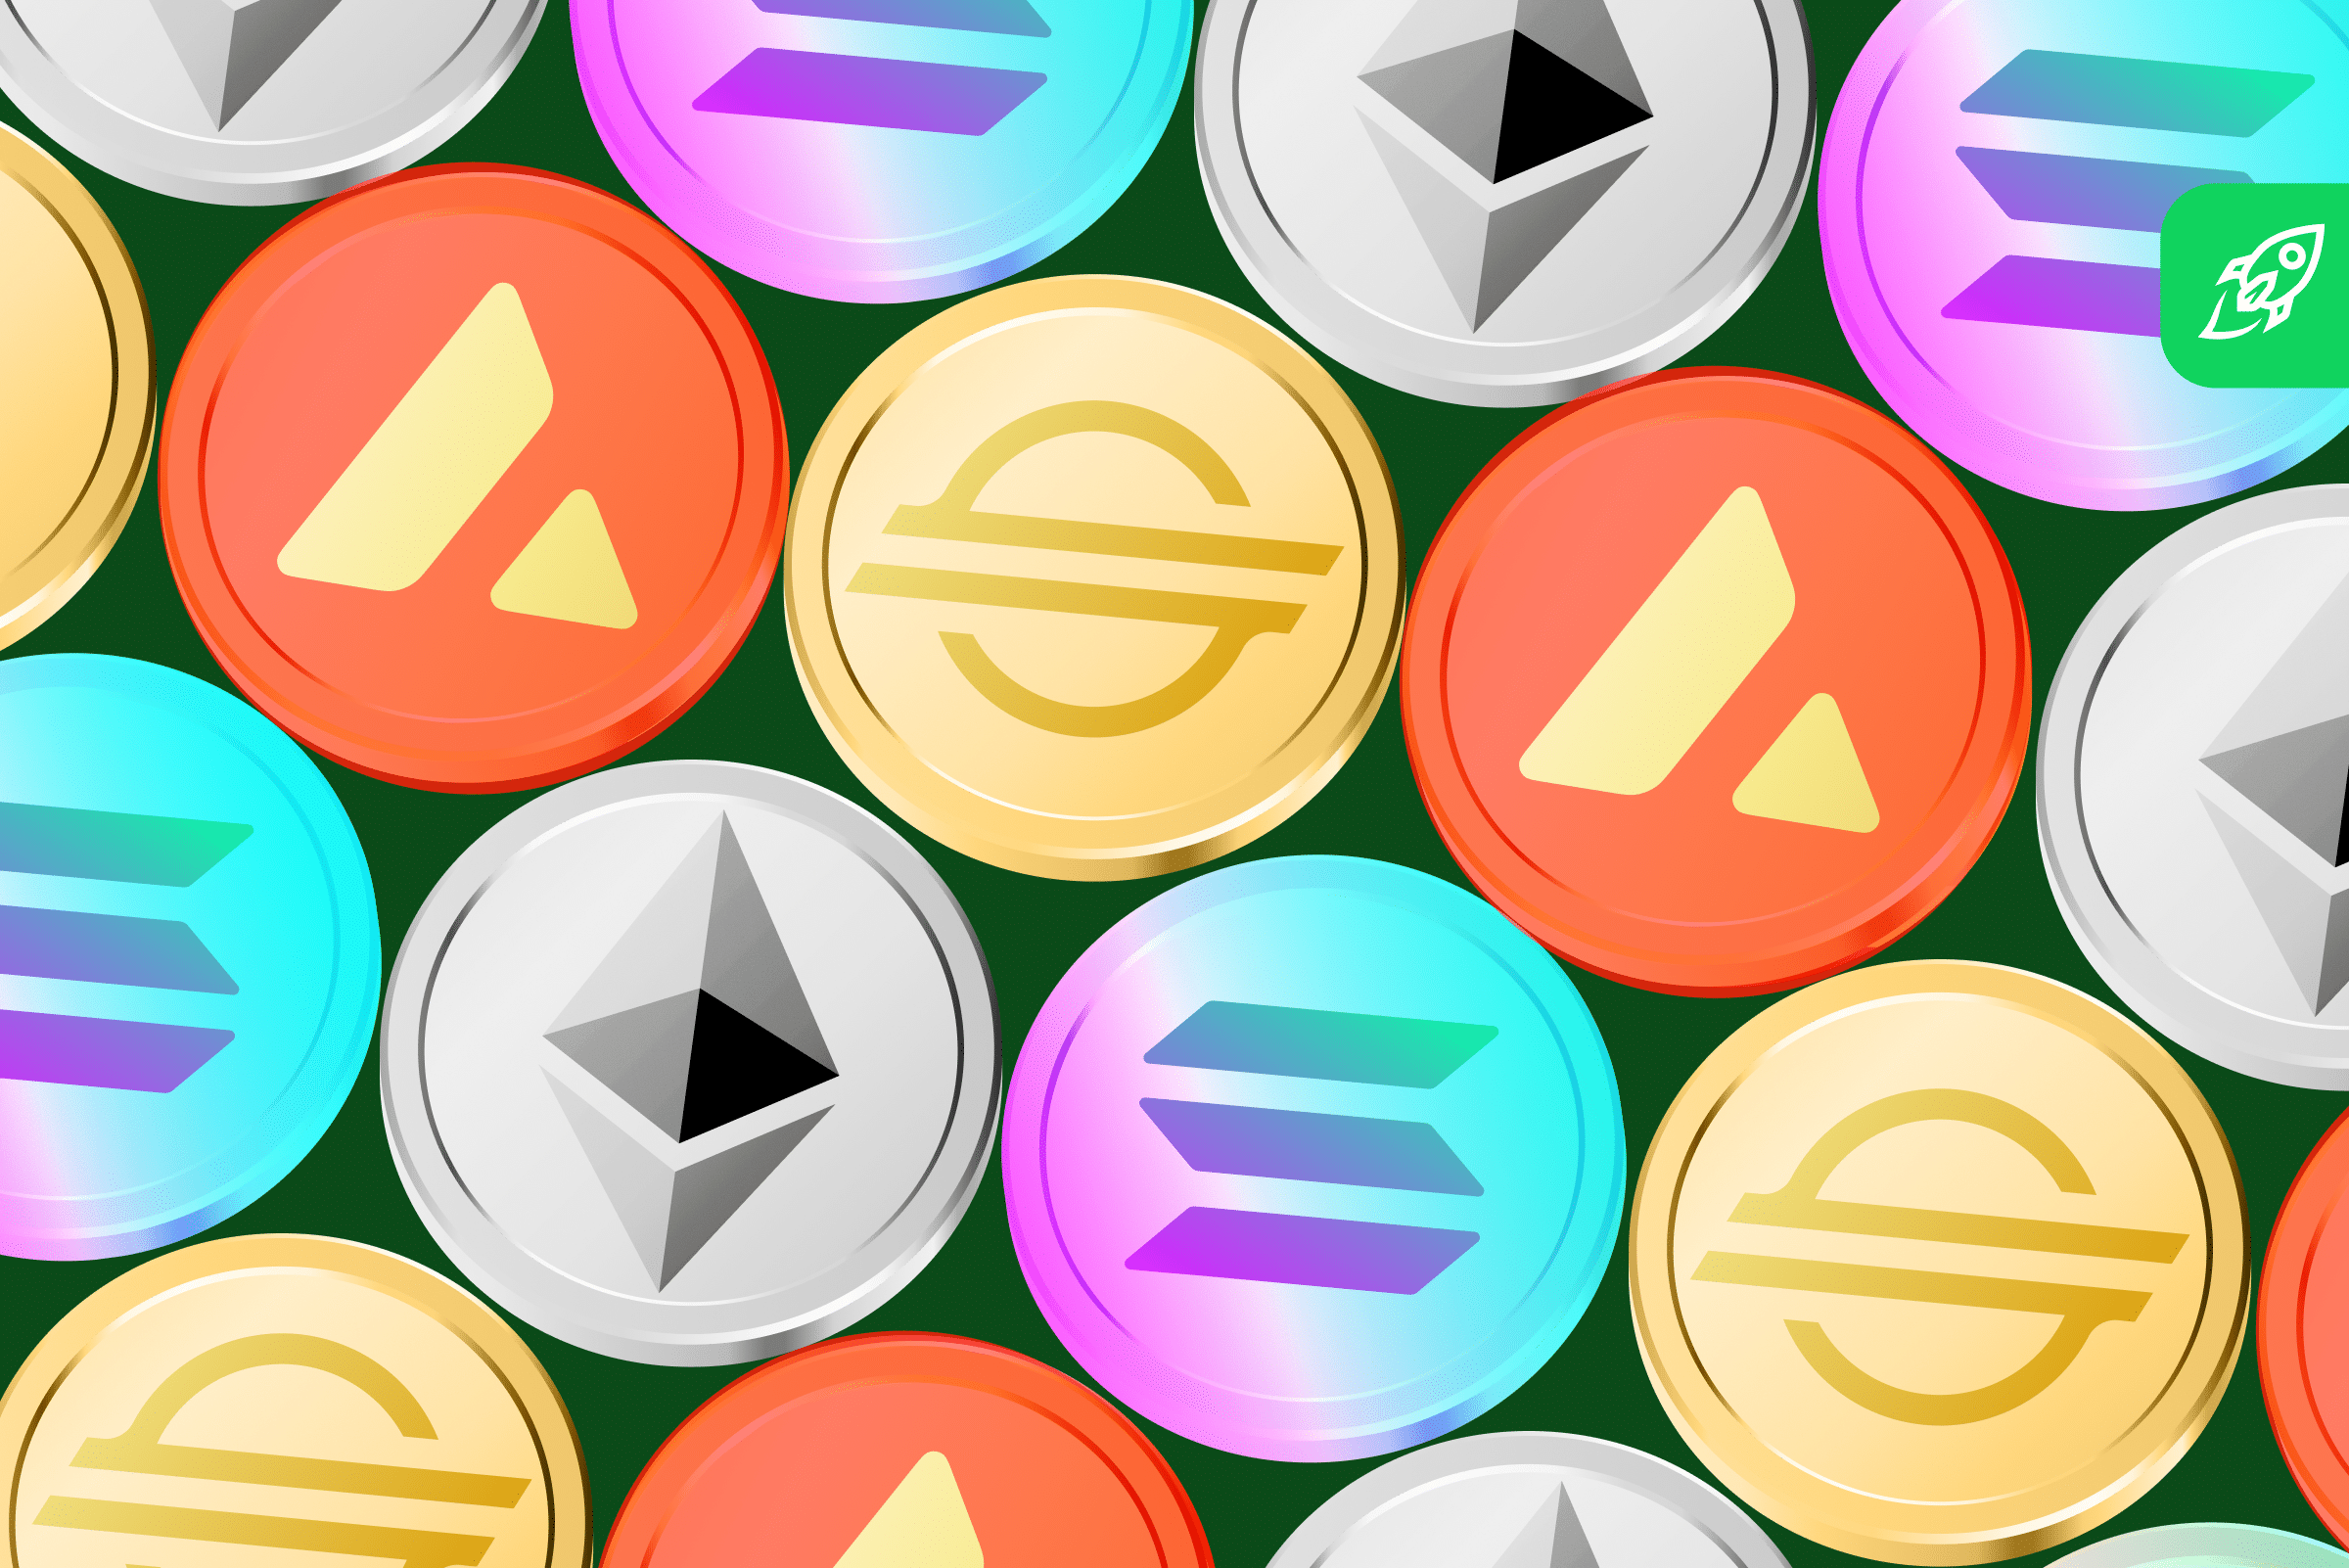 Trending Coins - Best Crypto to buy now?